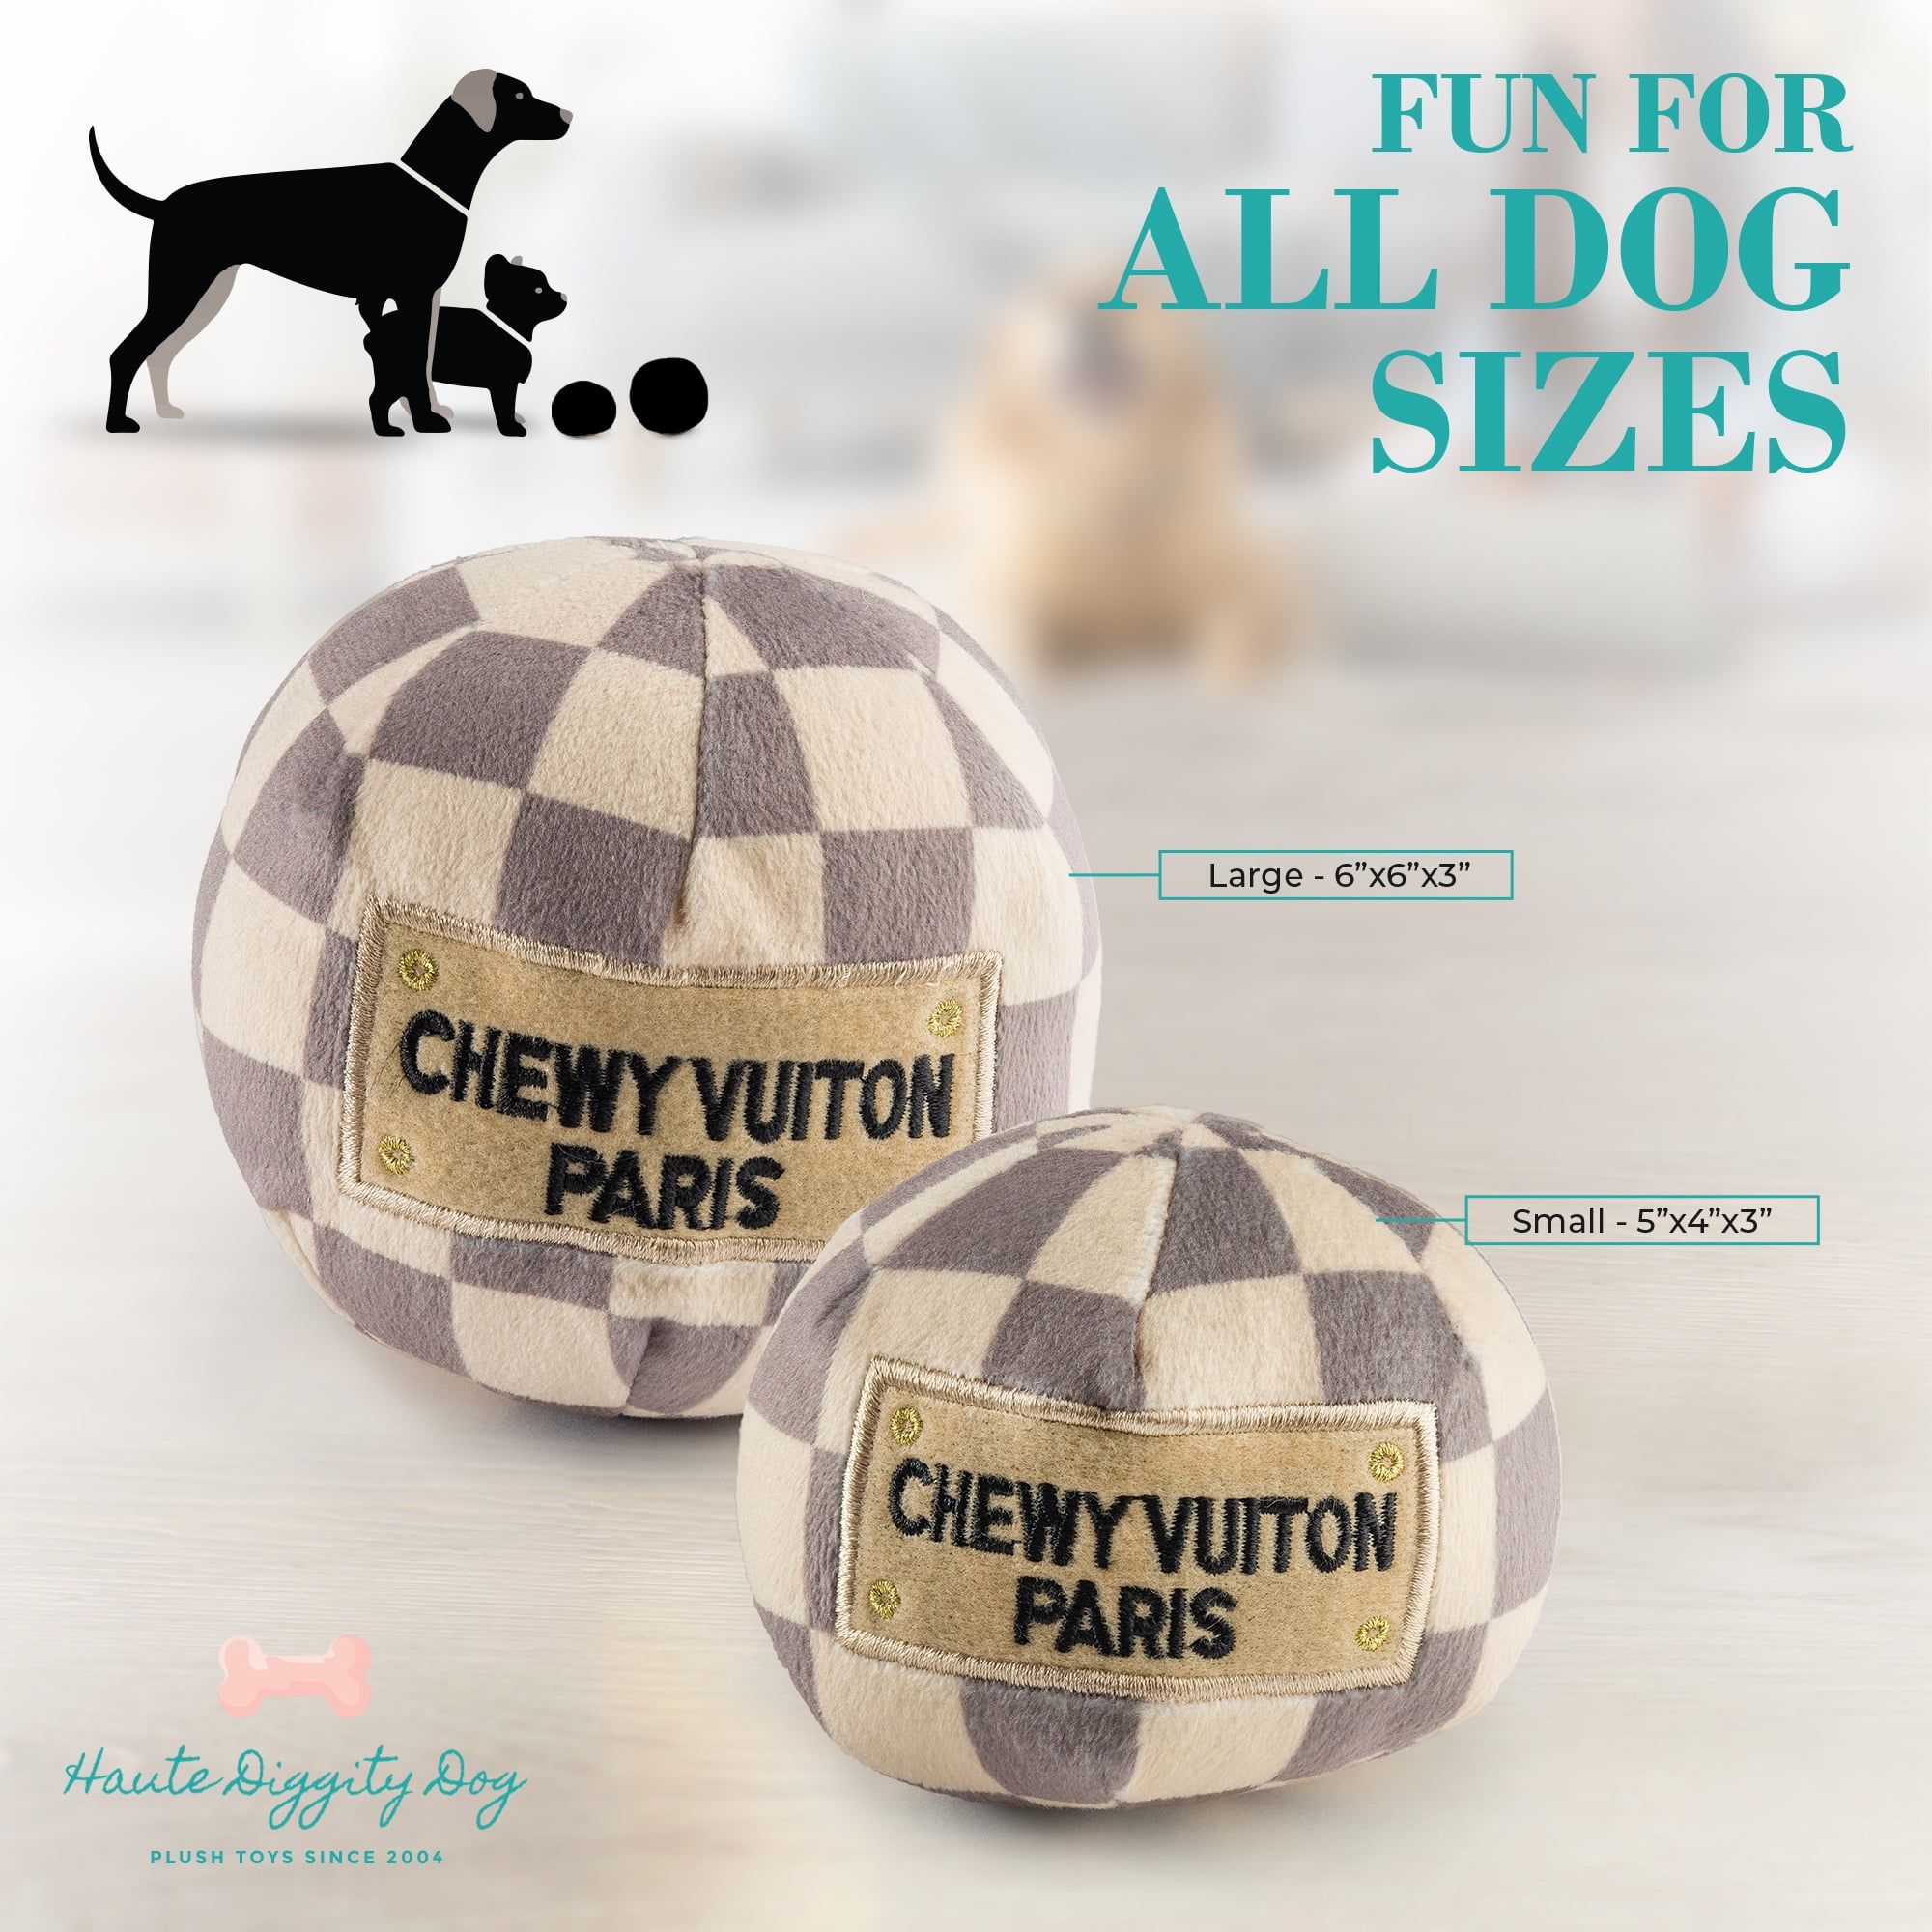  Haute Diggity Dog Chewy Vuiton Black Checker Collection – Soft  Plush Designer Dog Toys with Squeaker and Fun, Unique, Parody Designs from  Safe, Machine-Washable Materials for All Breeds & Sizes 